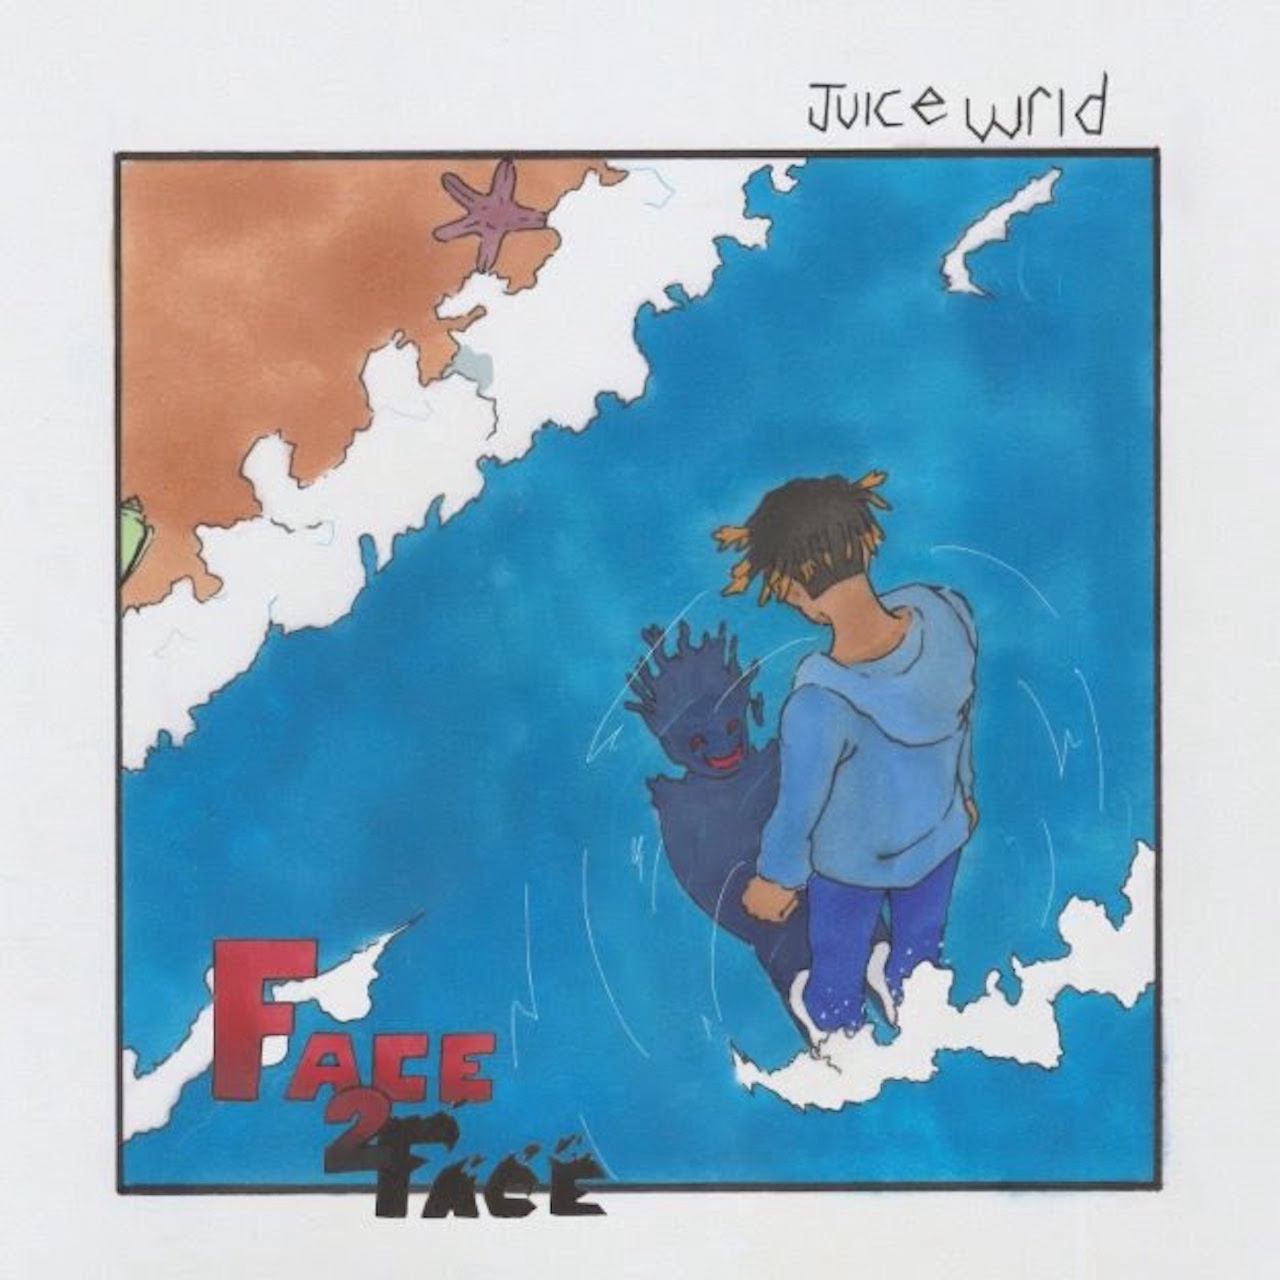 Listen To 'Face 2 Face' From The Late Juice WRLD